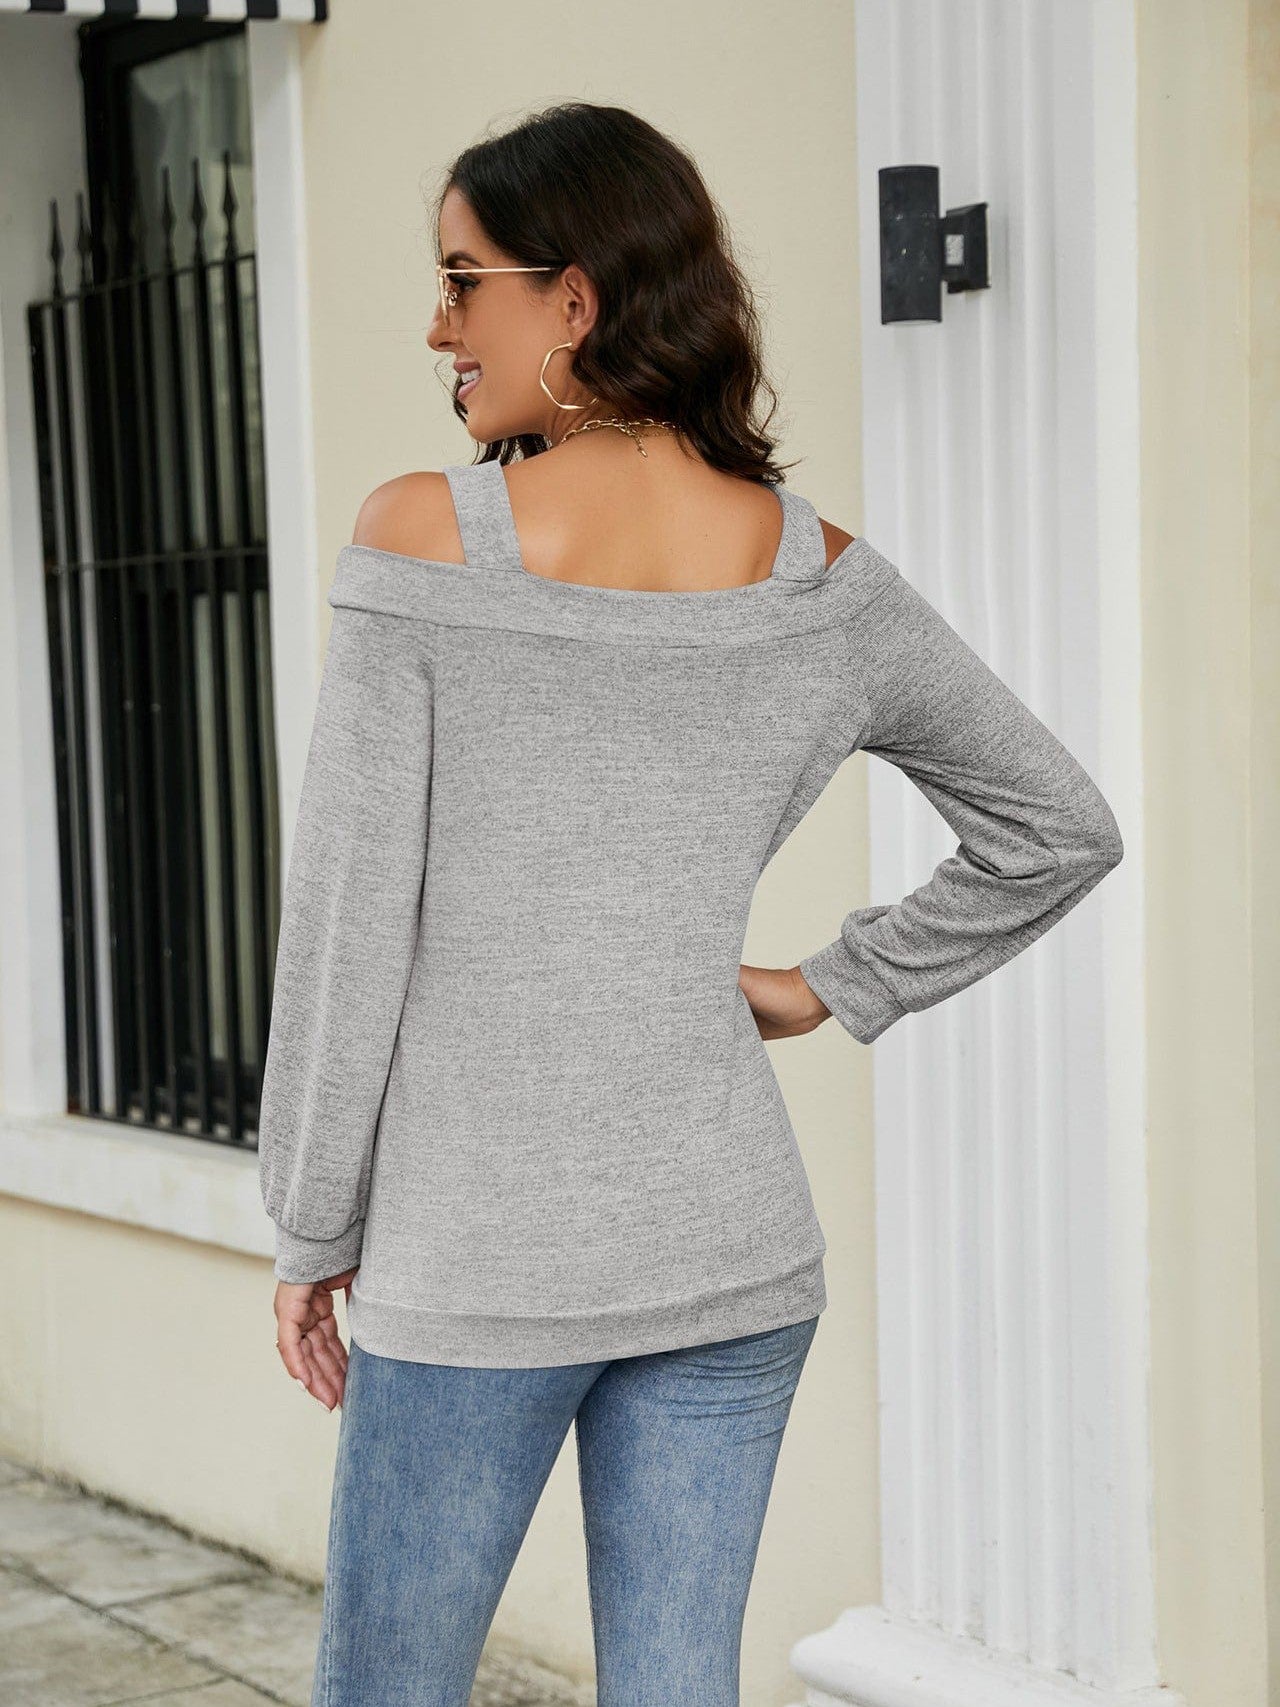 Off-shoulder hollow round neck solid color long-sleeved loose top T-shirt for women